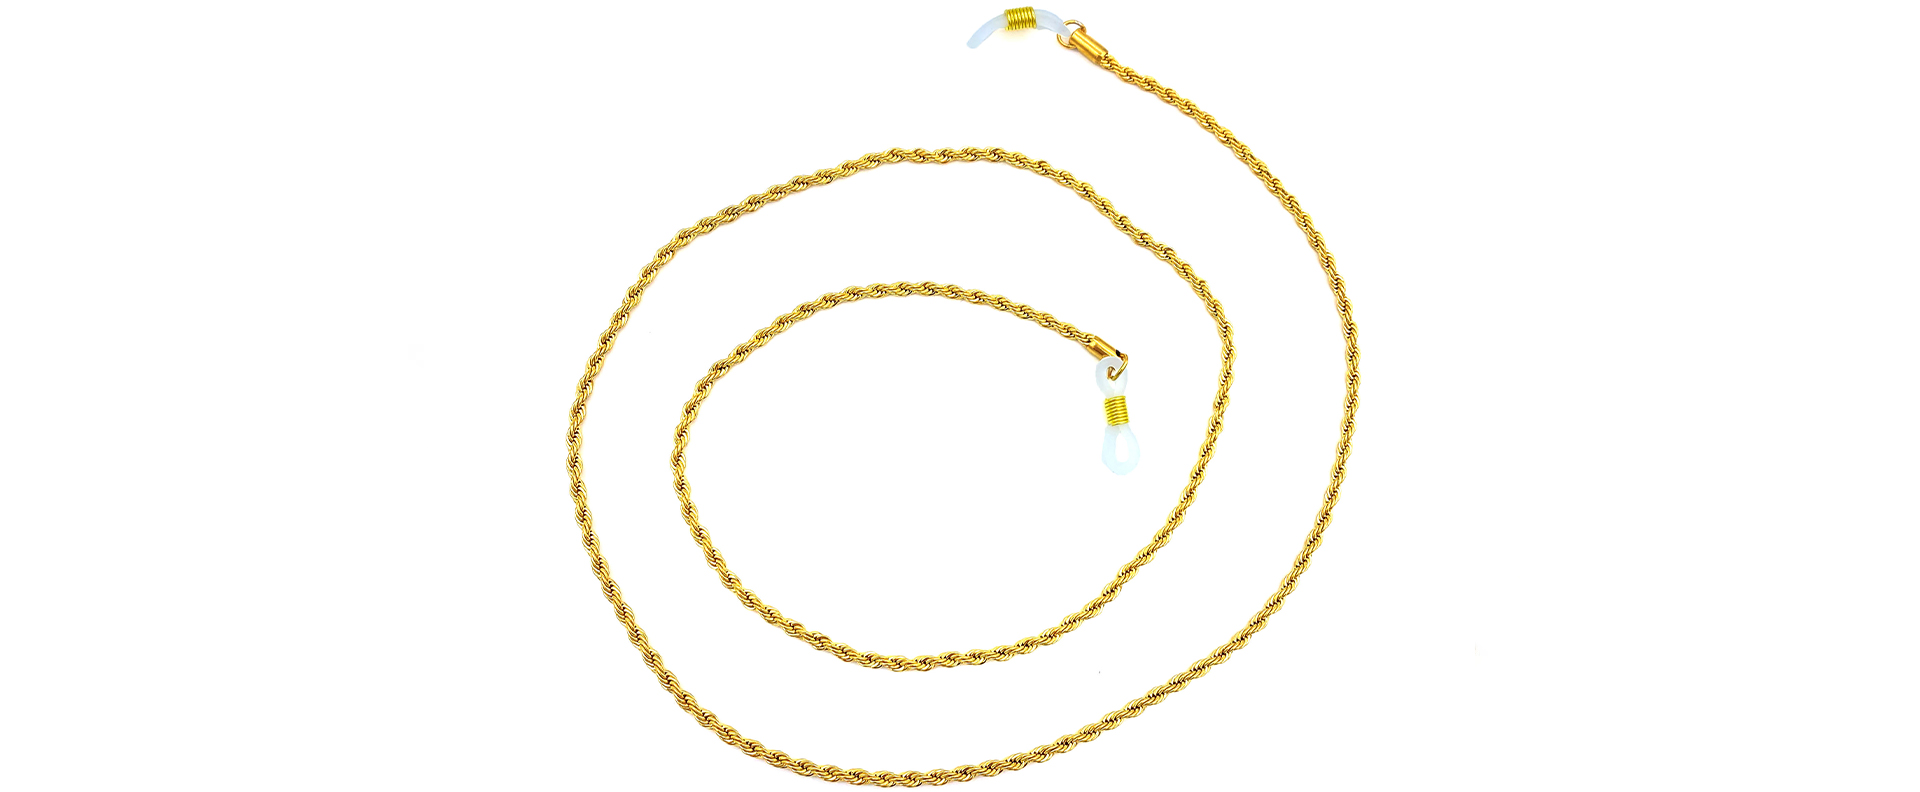 Boho Beach Sunny Necklace - Twisted Chain Gold